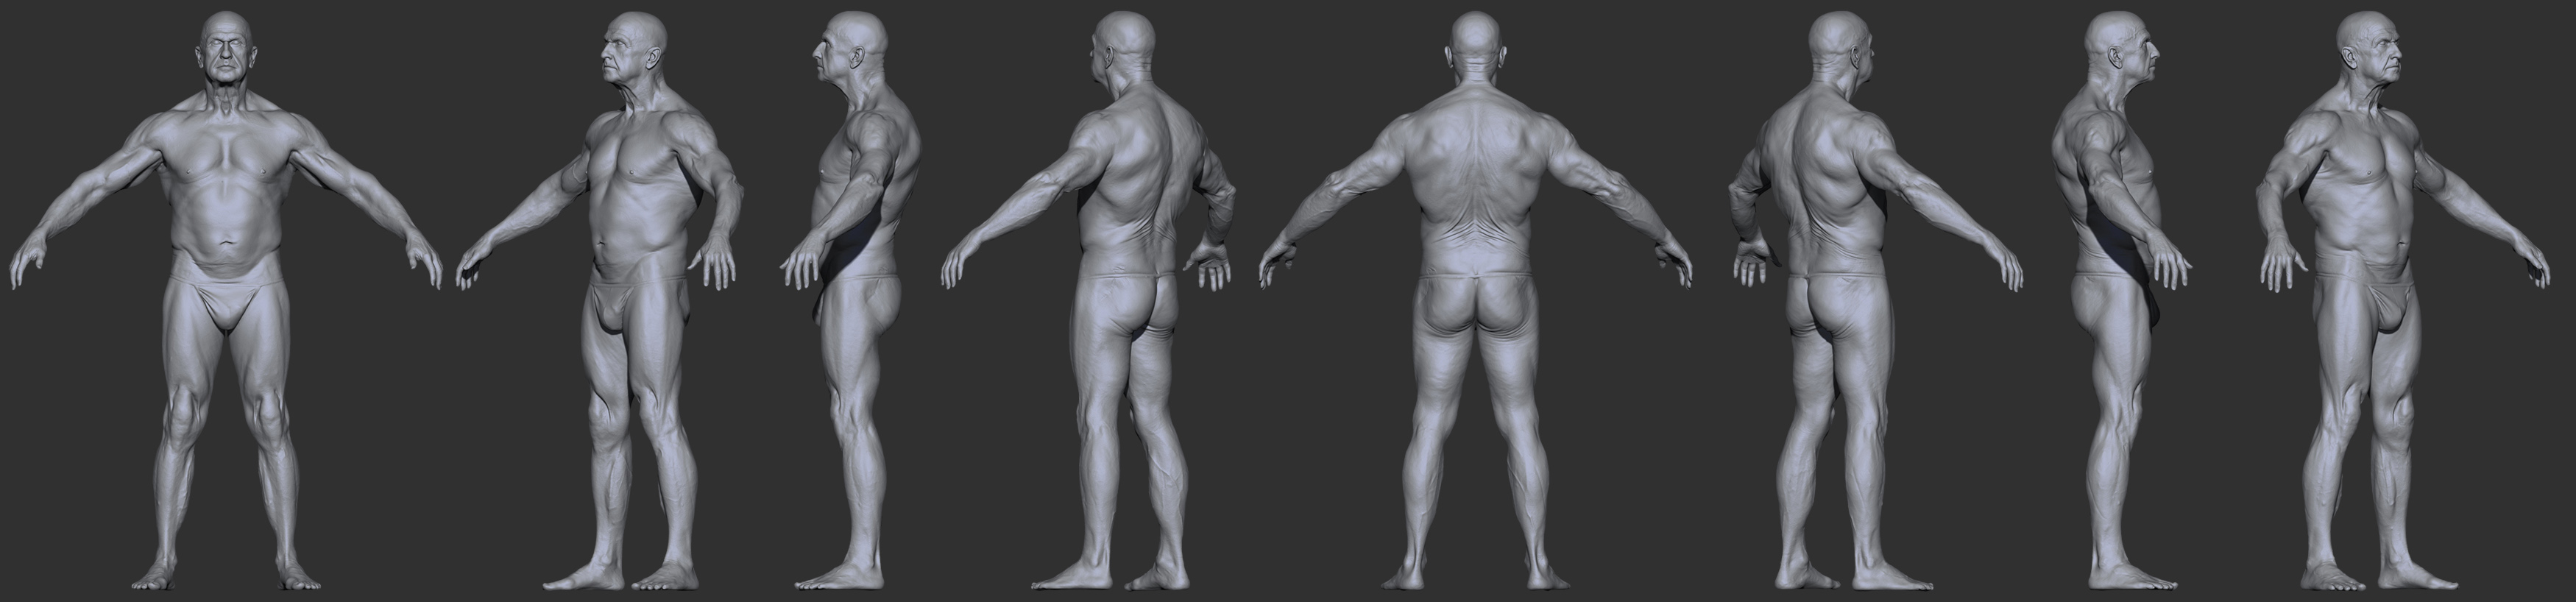 Spinny of Aged Muscular Male ZBrush Shaders Wireframes